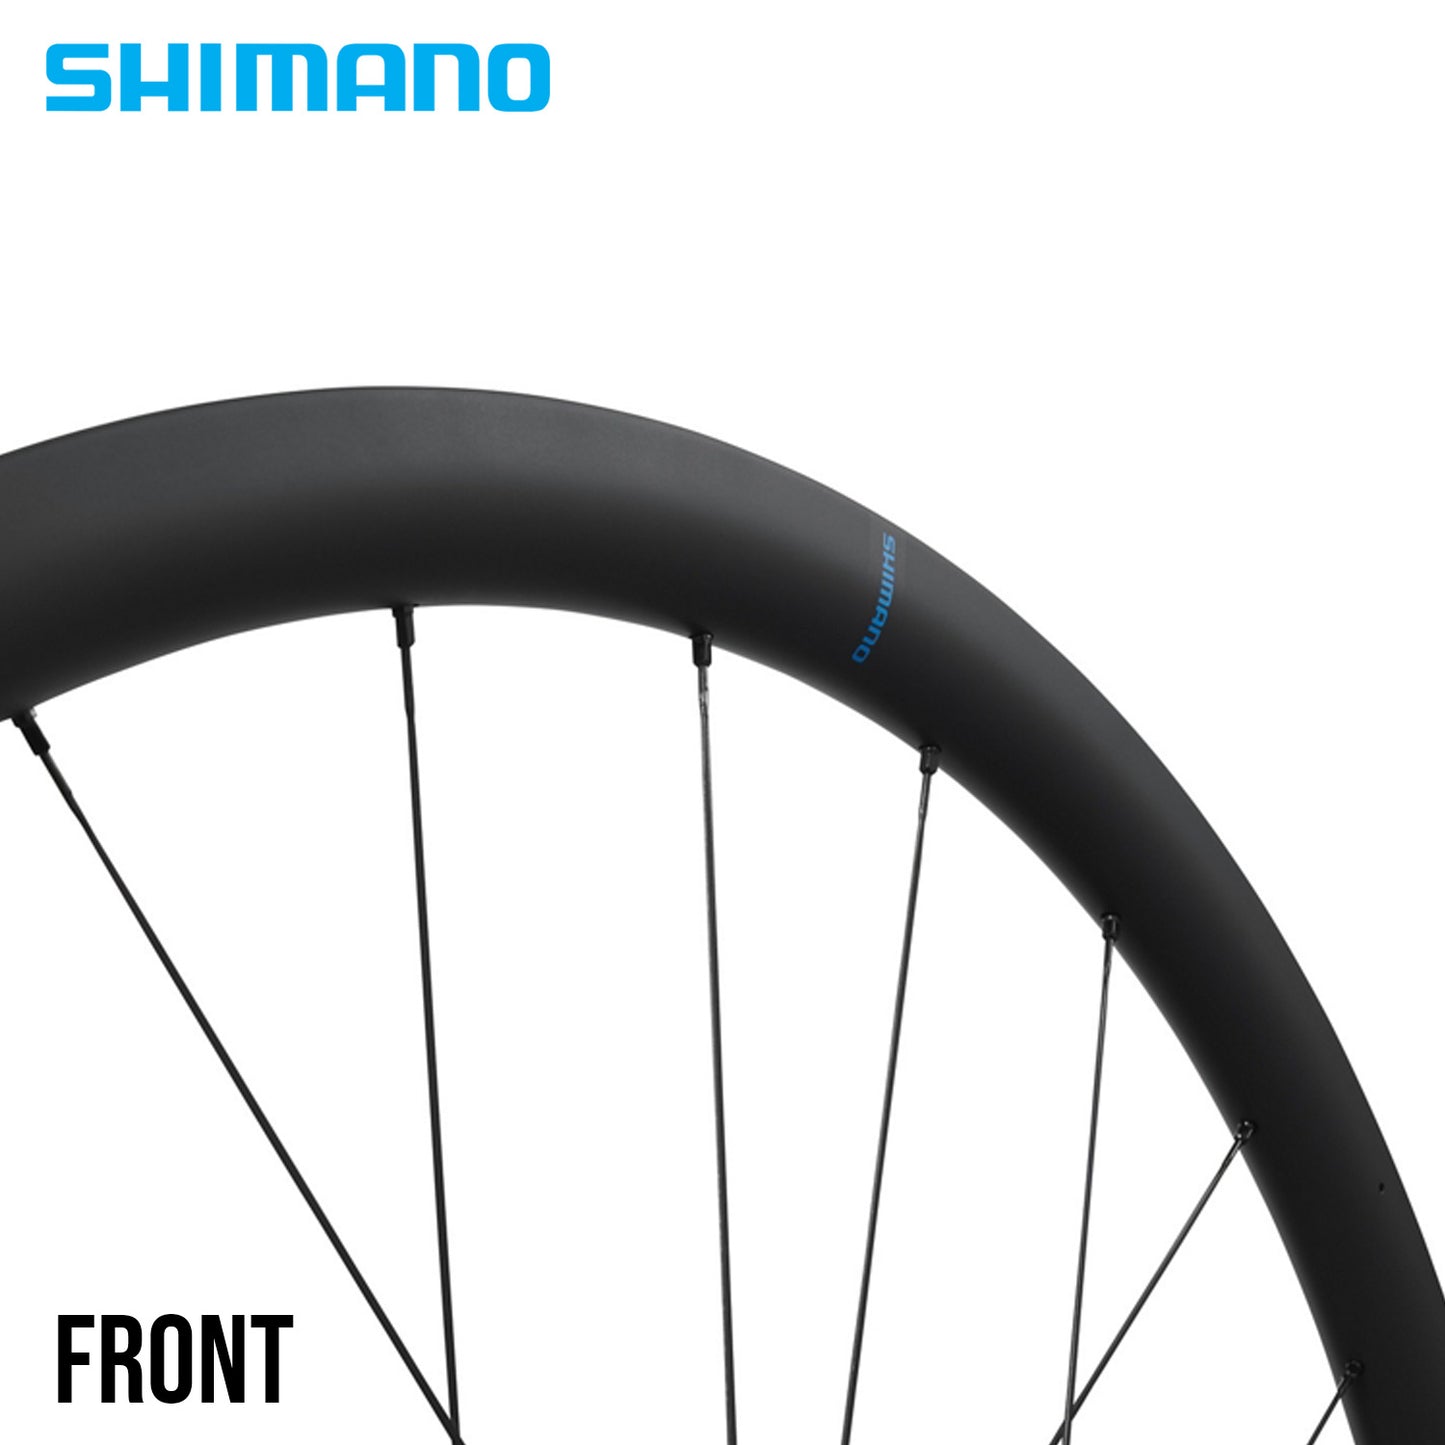 Shimano GRX WH-RX880-700C Gravel Microspline Carbon Tubeless Disc Wheelset Front and Rear 1394g